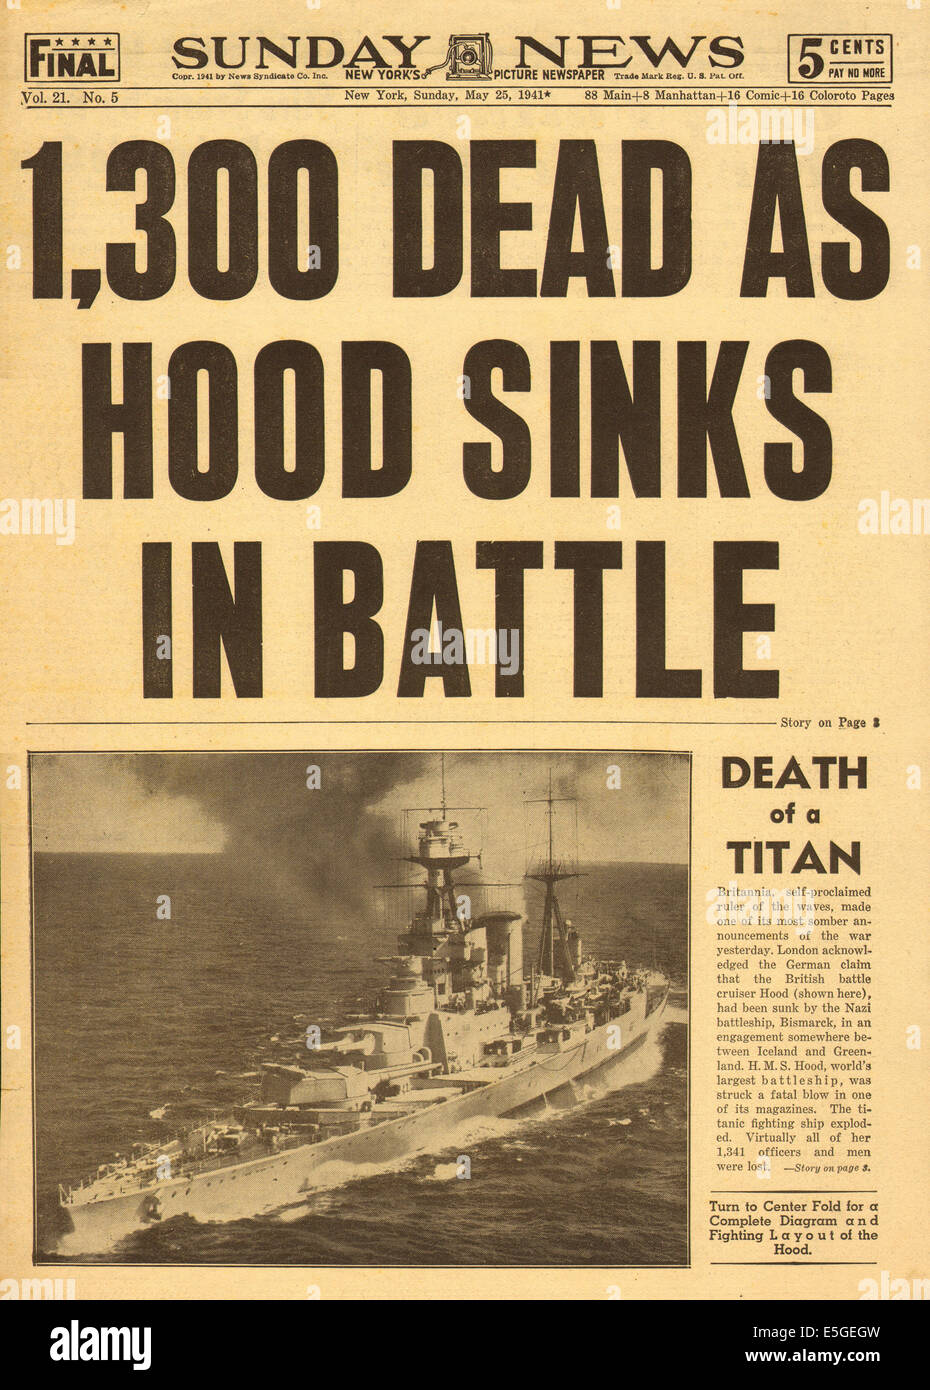 1941 Sunday News New York Front Page Reporting The Sinking